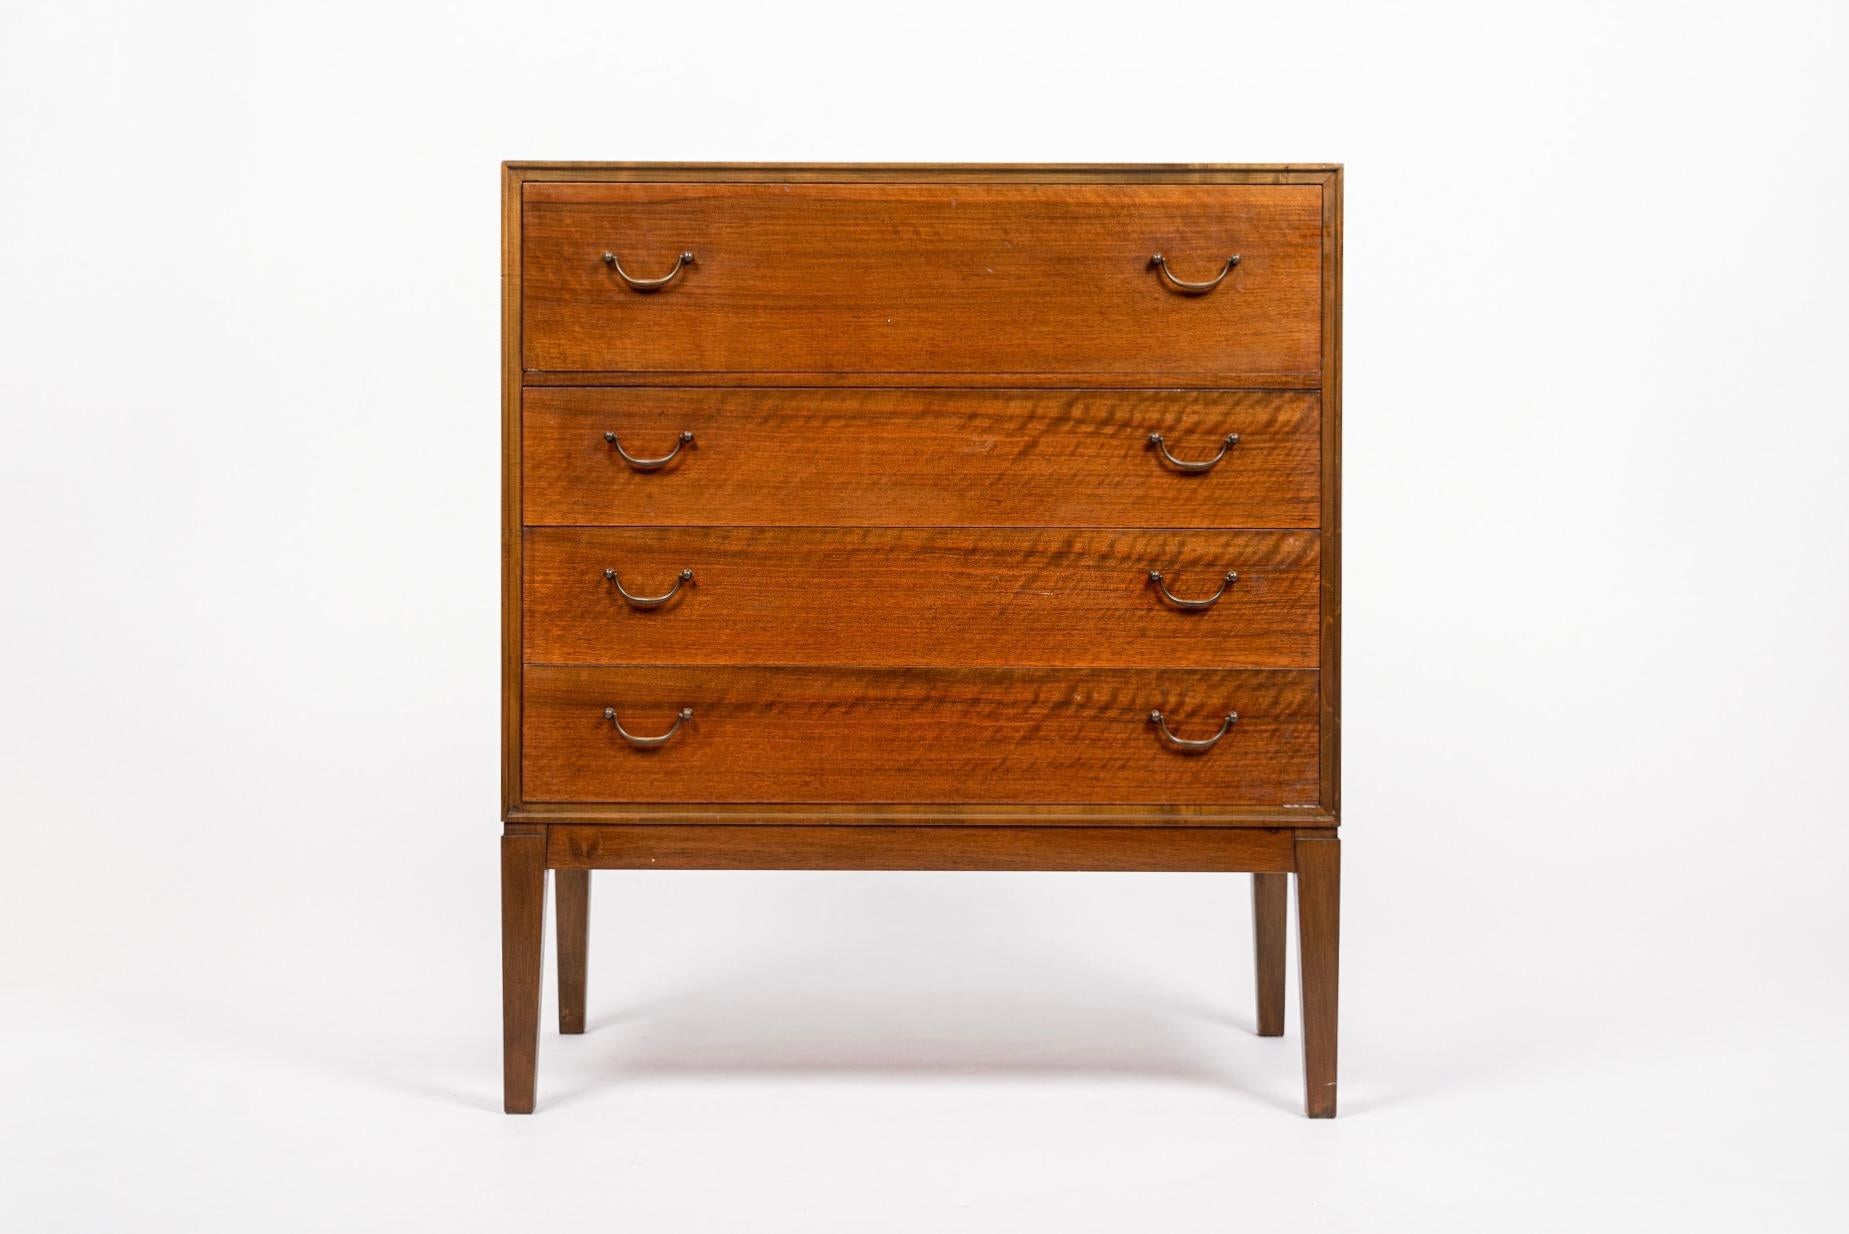 This vintage mid century Danish modern cabinetmaker vanity dresser in the style of Frits Henningsen is circa 1960. Expertly crafted from walnut wood, this unique cabinet has four spacious dovetailed drawers with original hanging brass handles and